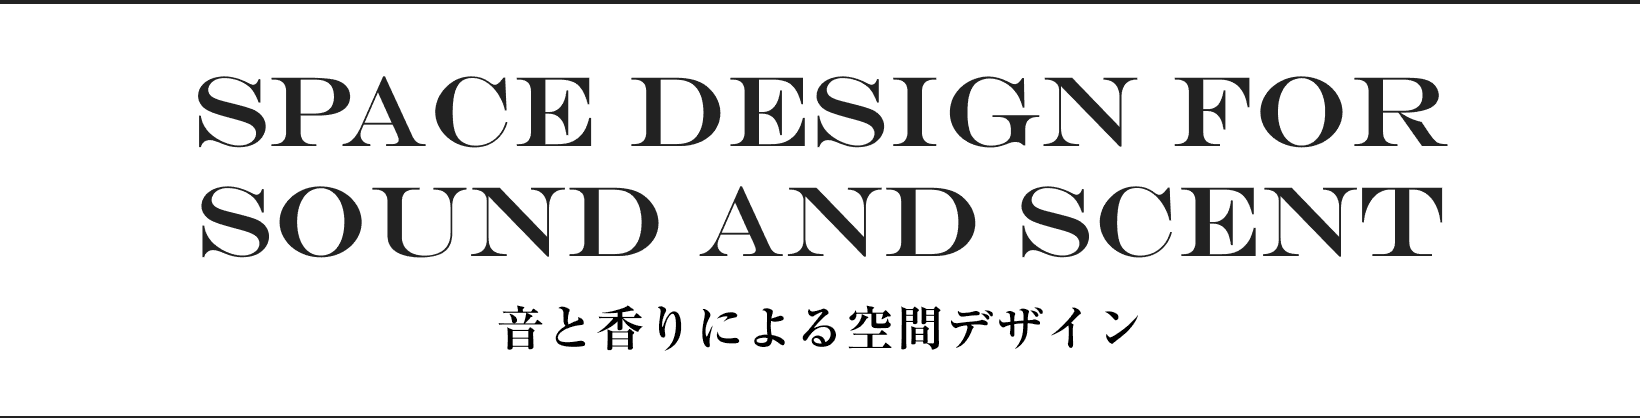 SPACE DESIGN FOR SOUND AND SCENT 音と香りによる空間デザイン